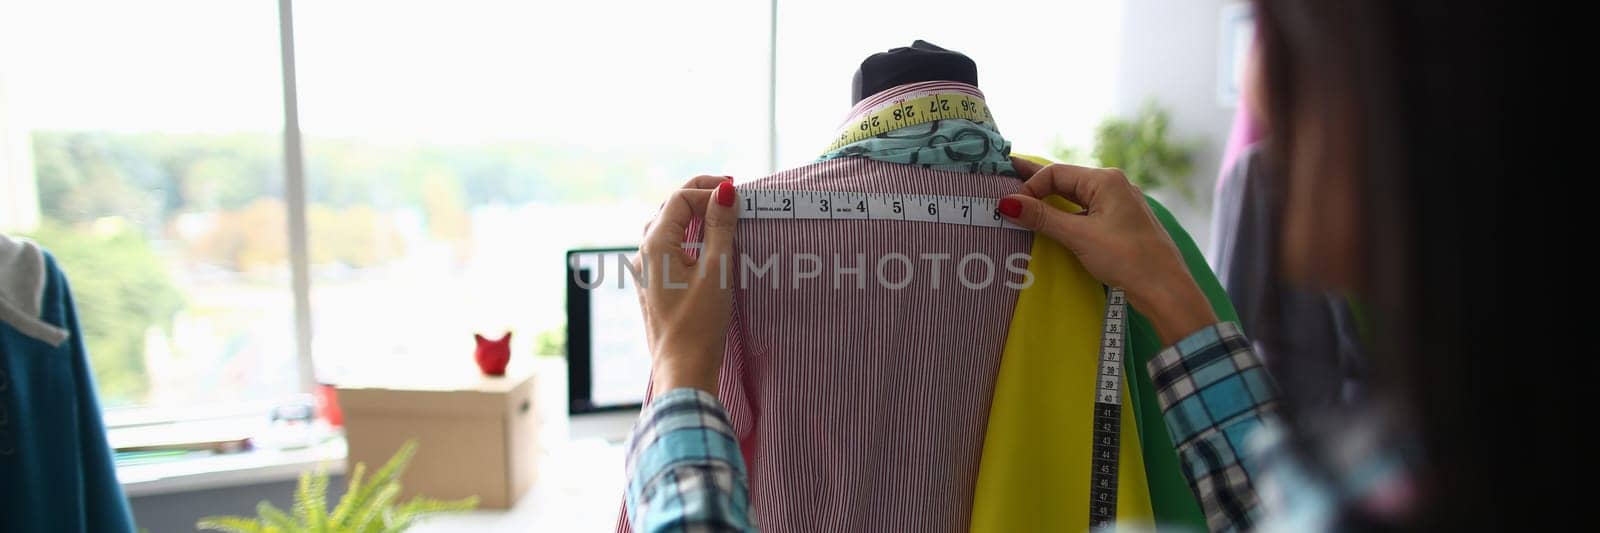 Woman fashion designer seamstress stylist measuring mannequin with tape. Working with mannequin in cozy creative design studio or atelier concept